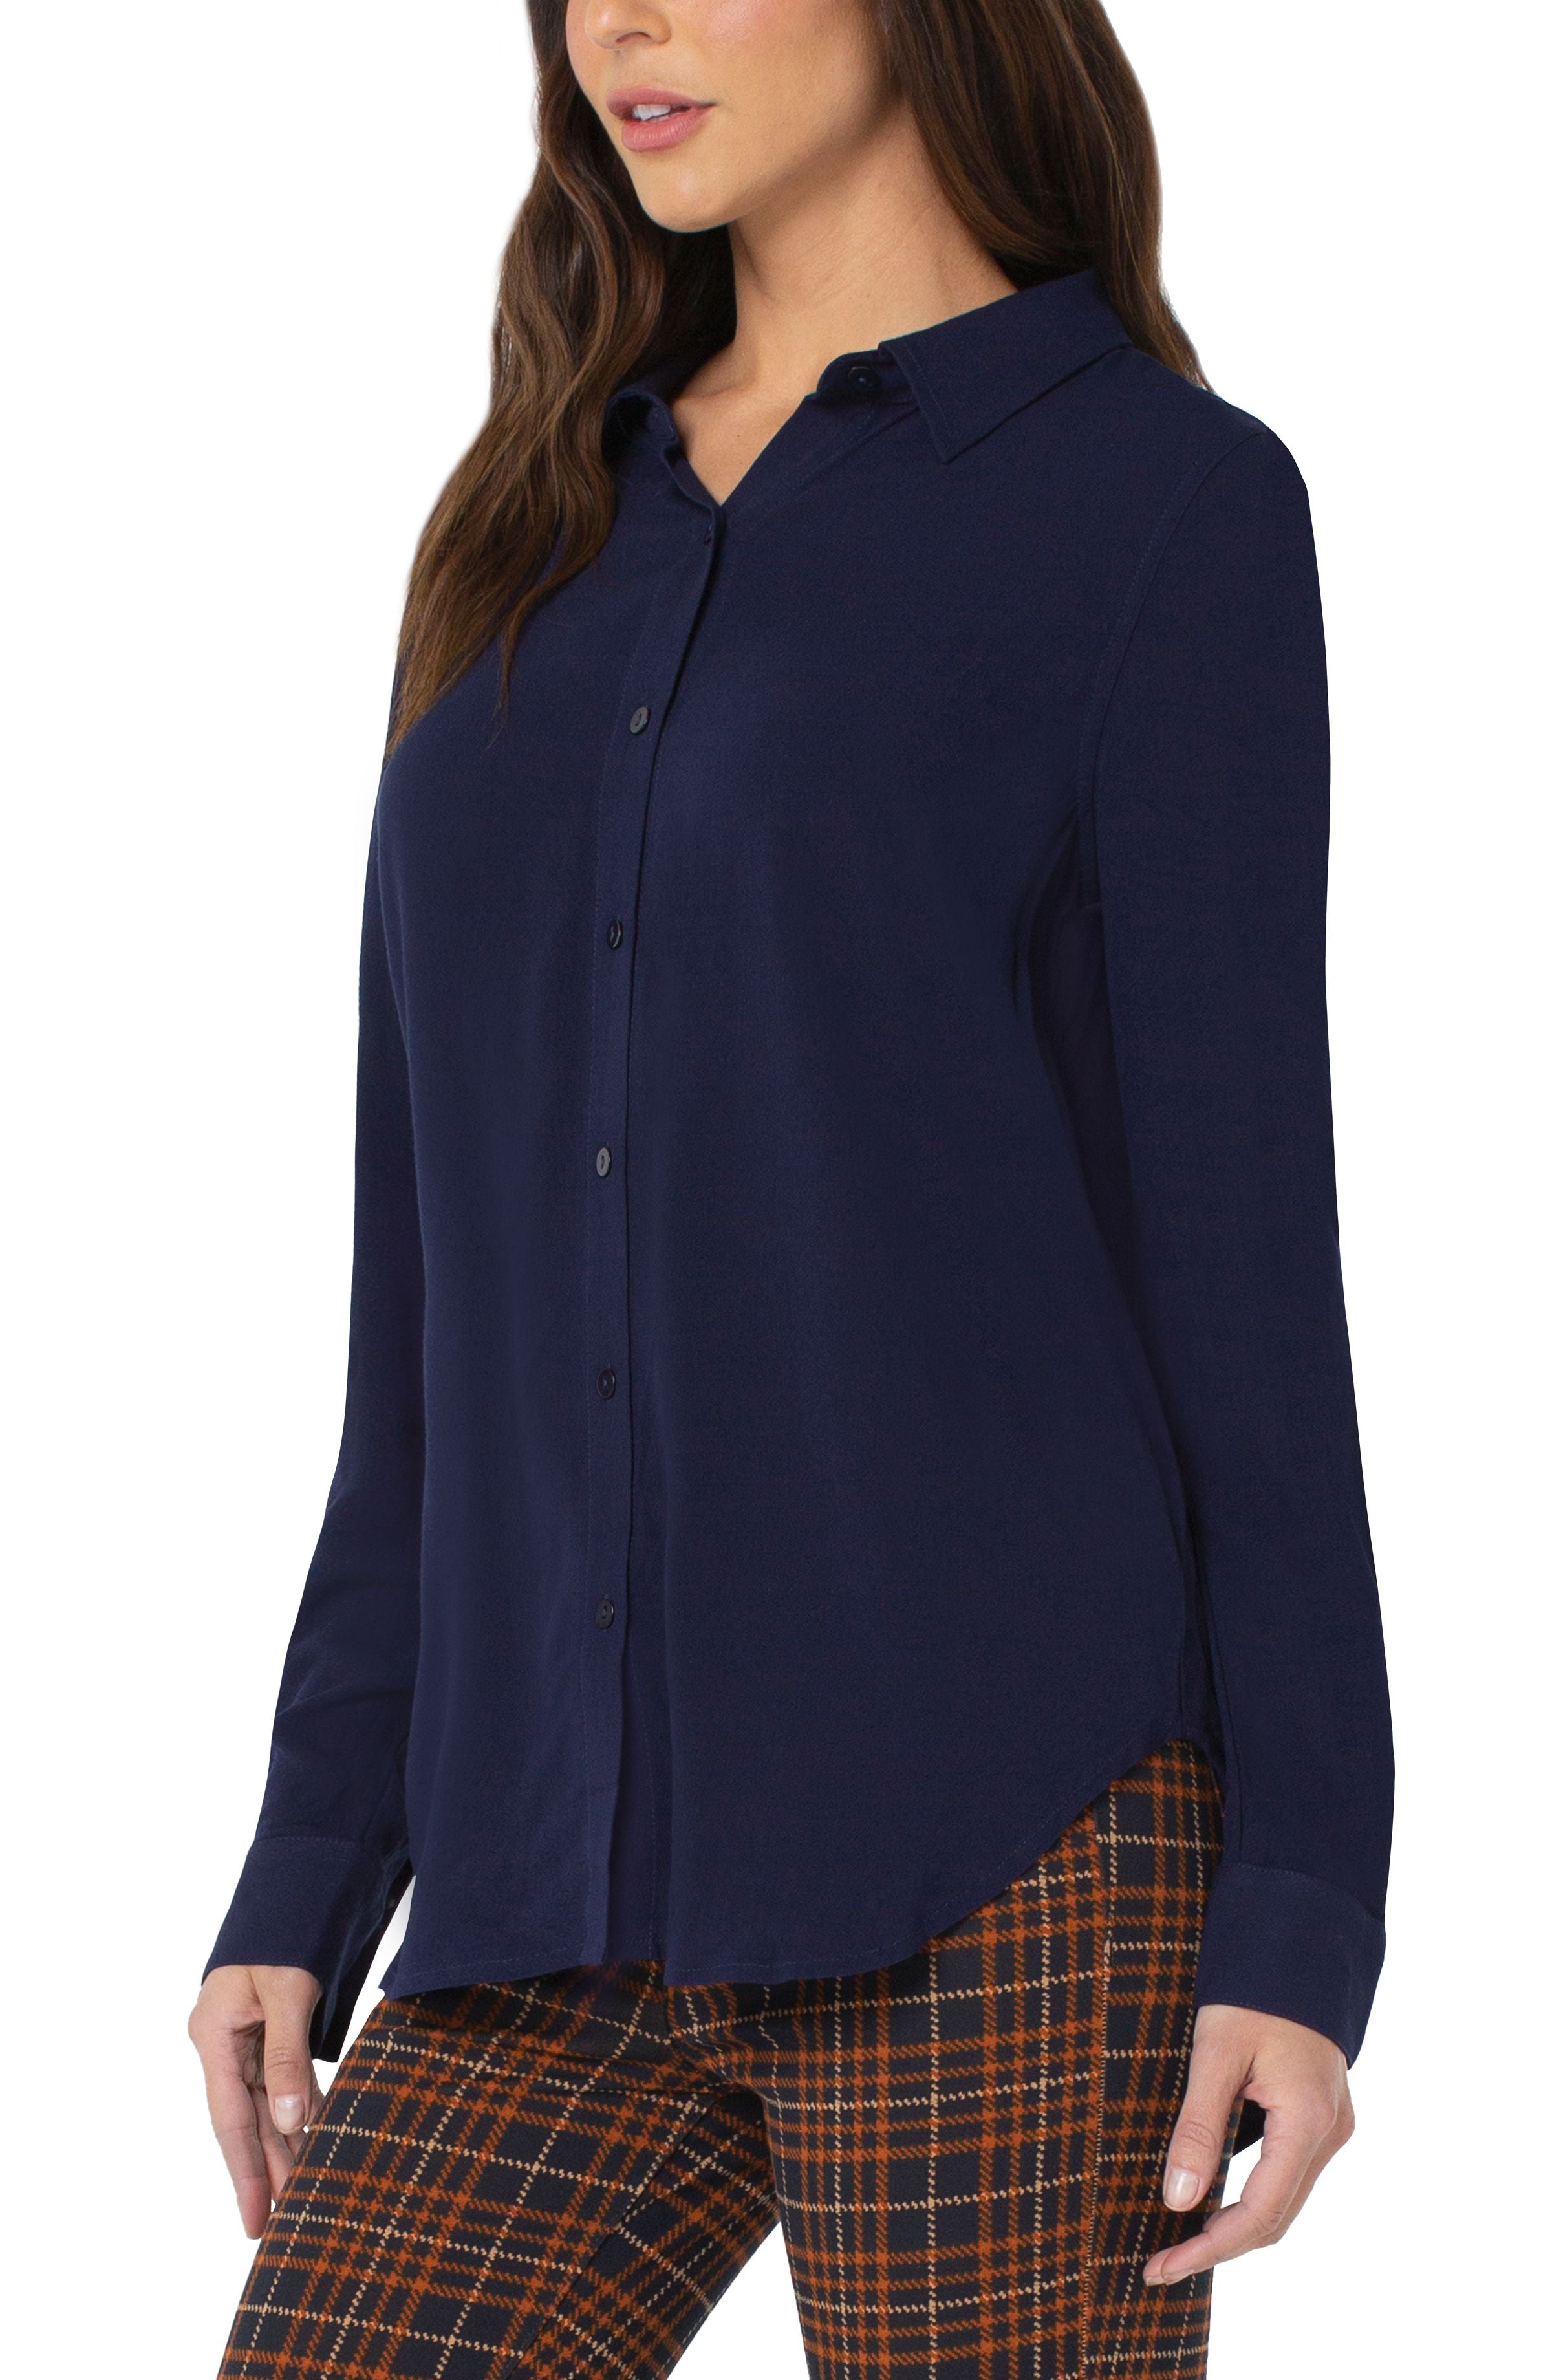 Button Front Tunic W/ Inverted Pleat